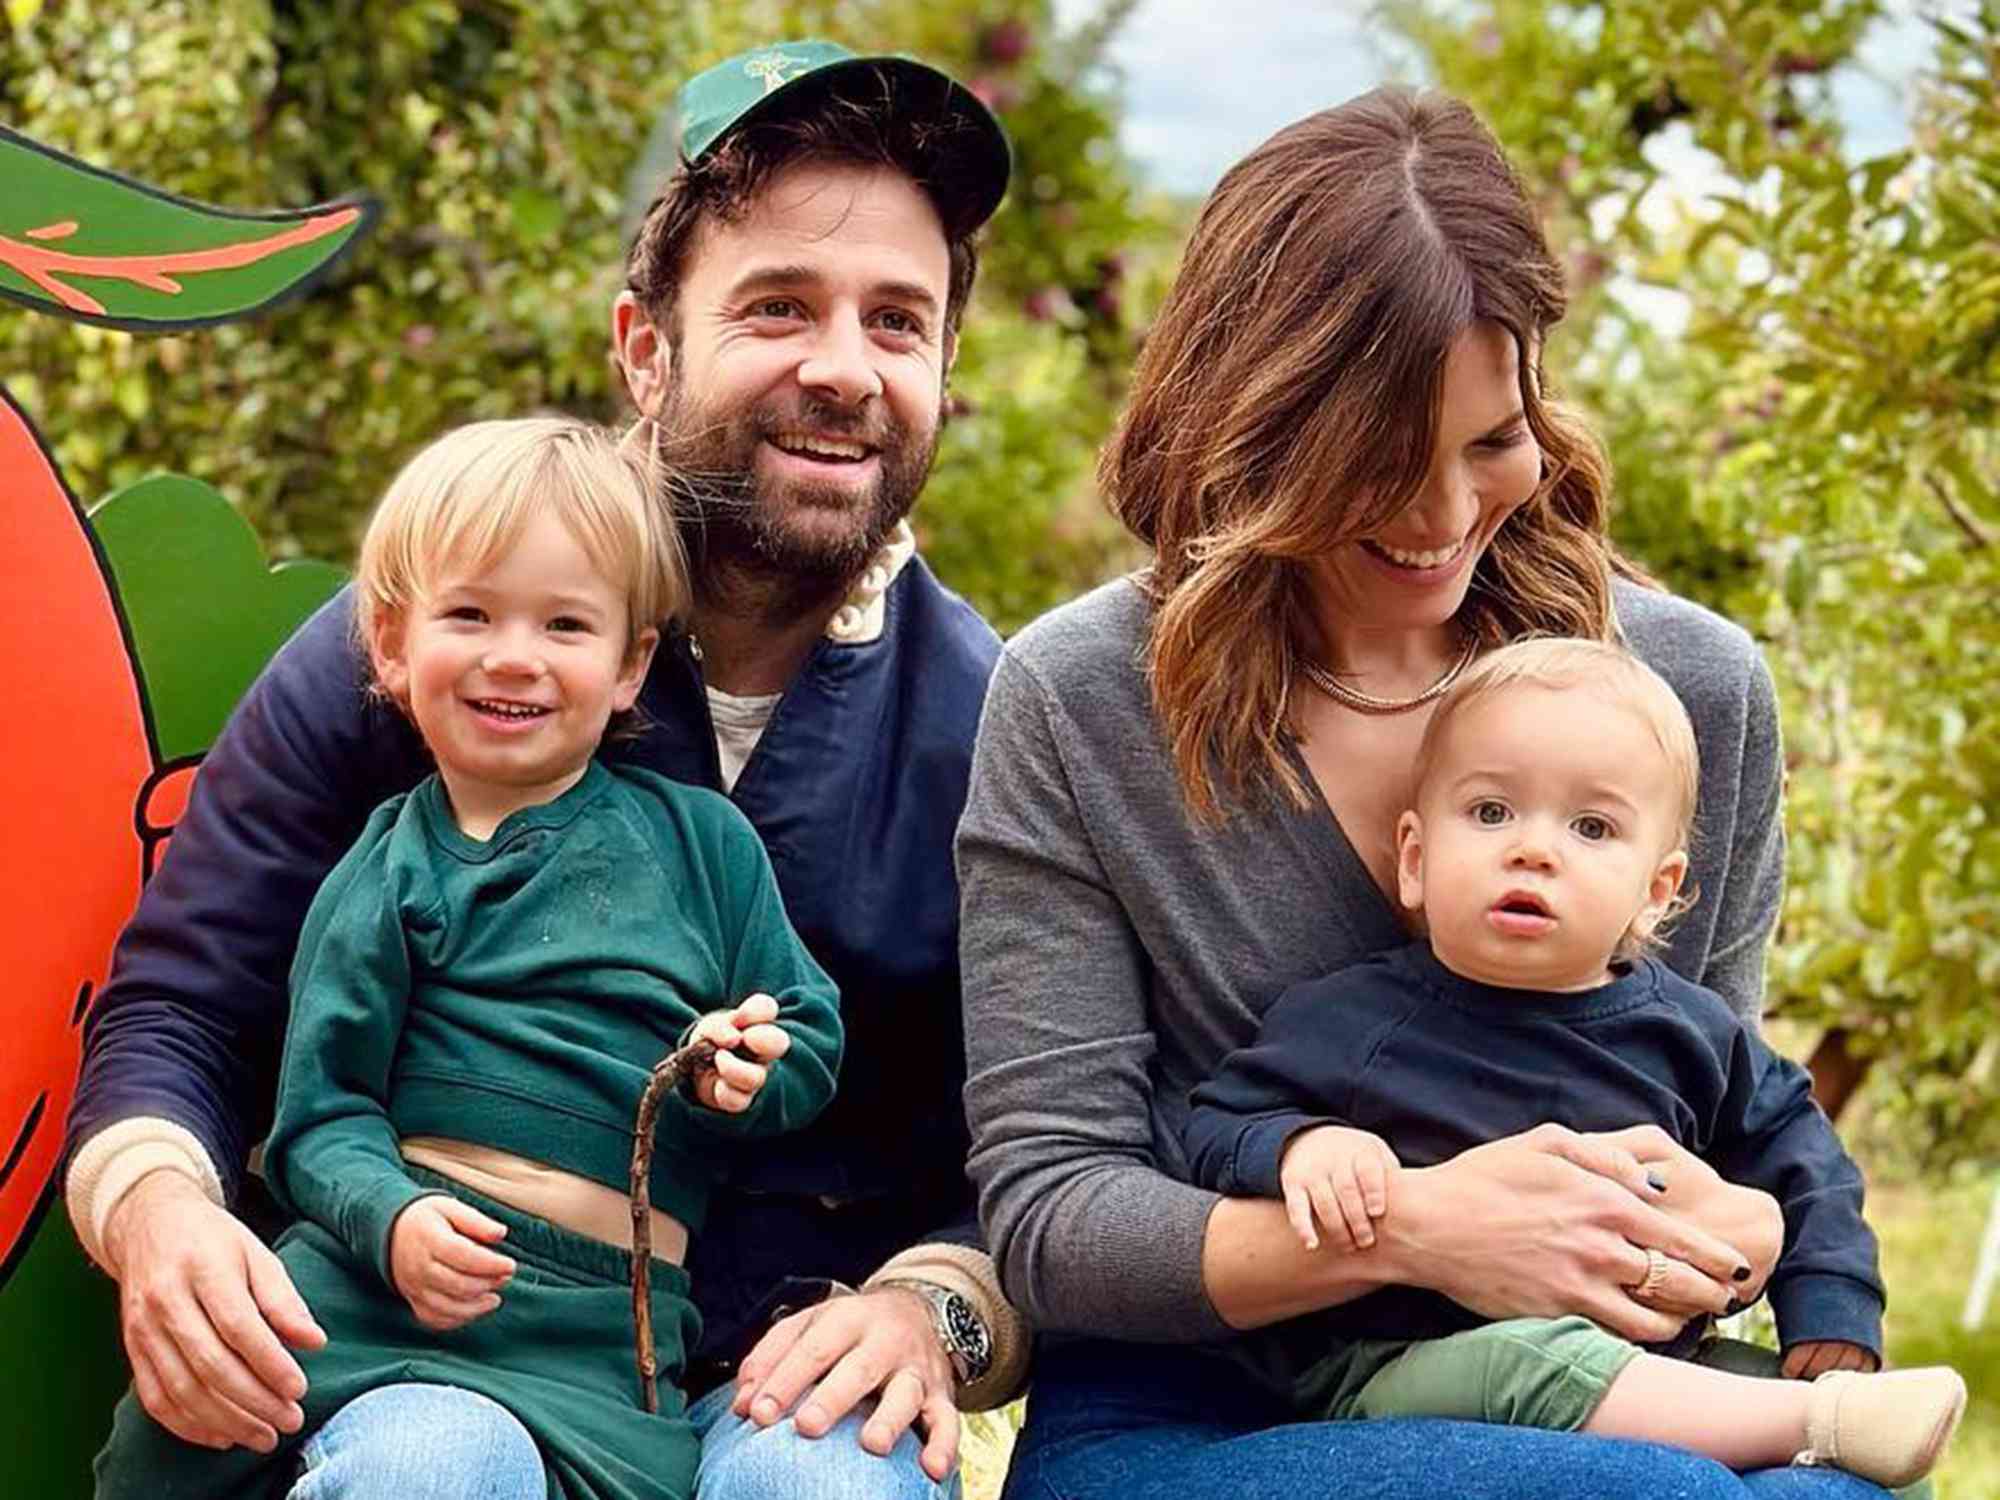 Mandy Moore and Taylor Goldsmith with their kids, August and Oscar.